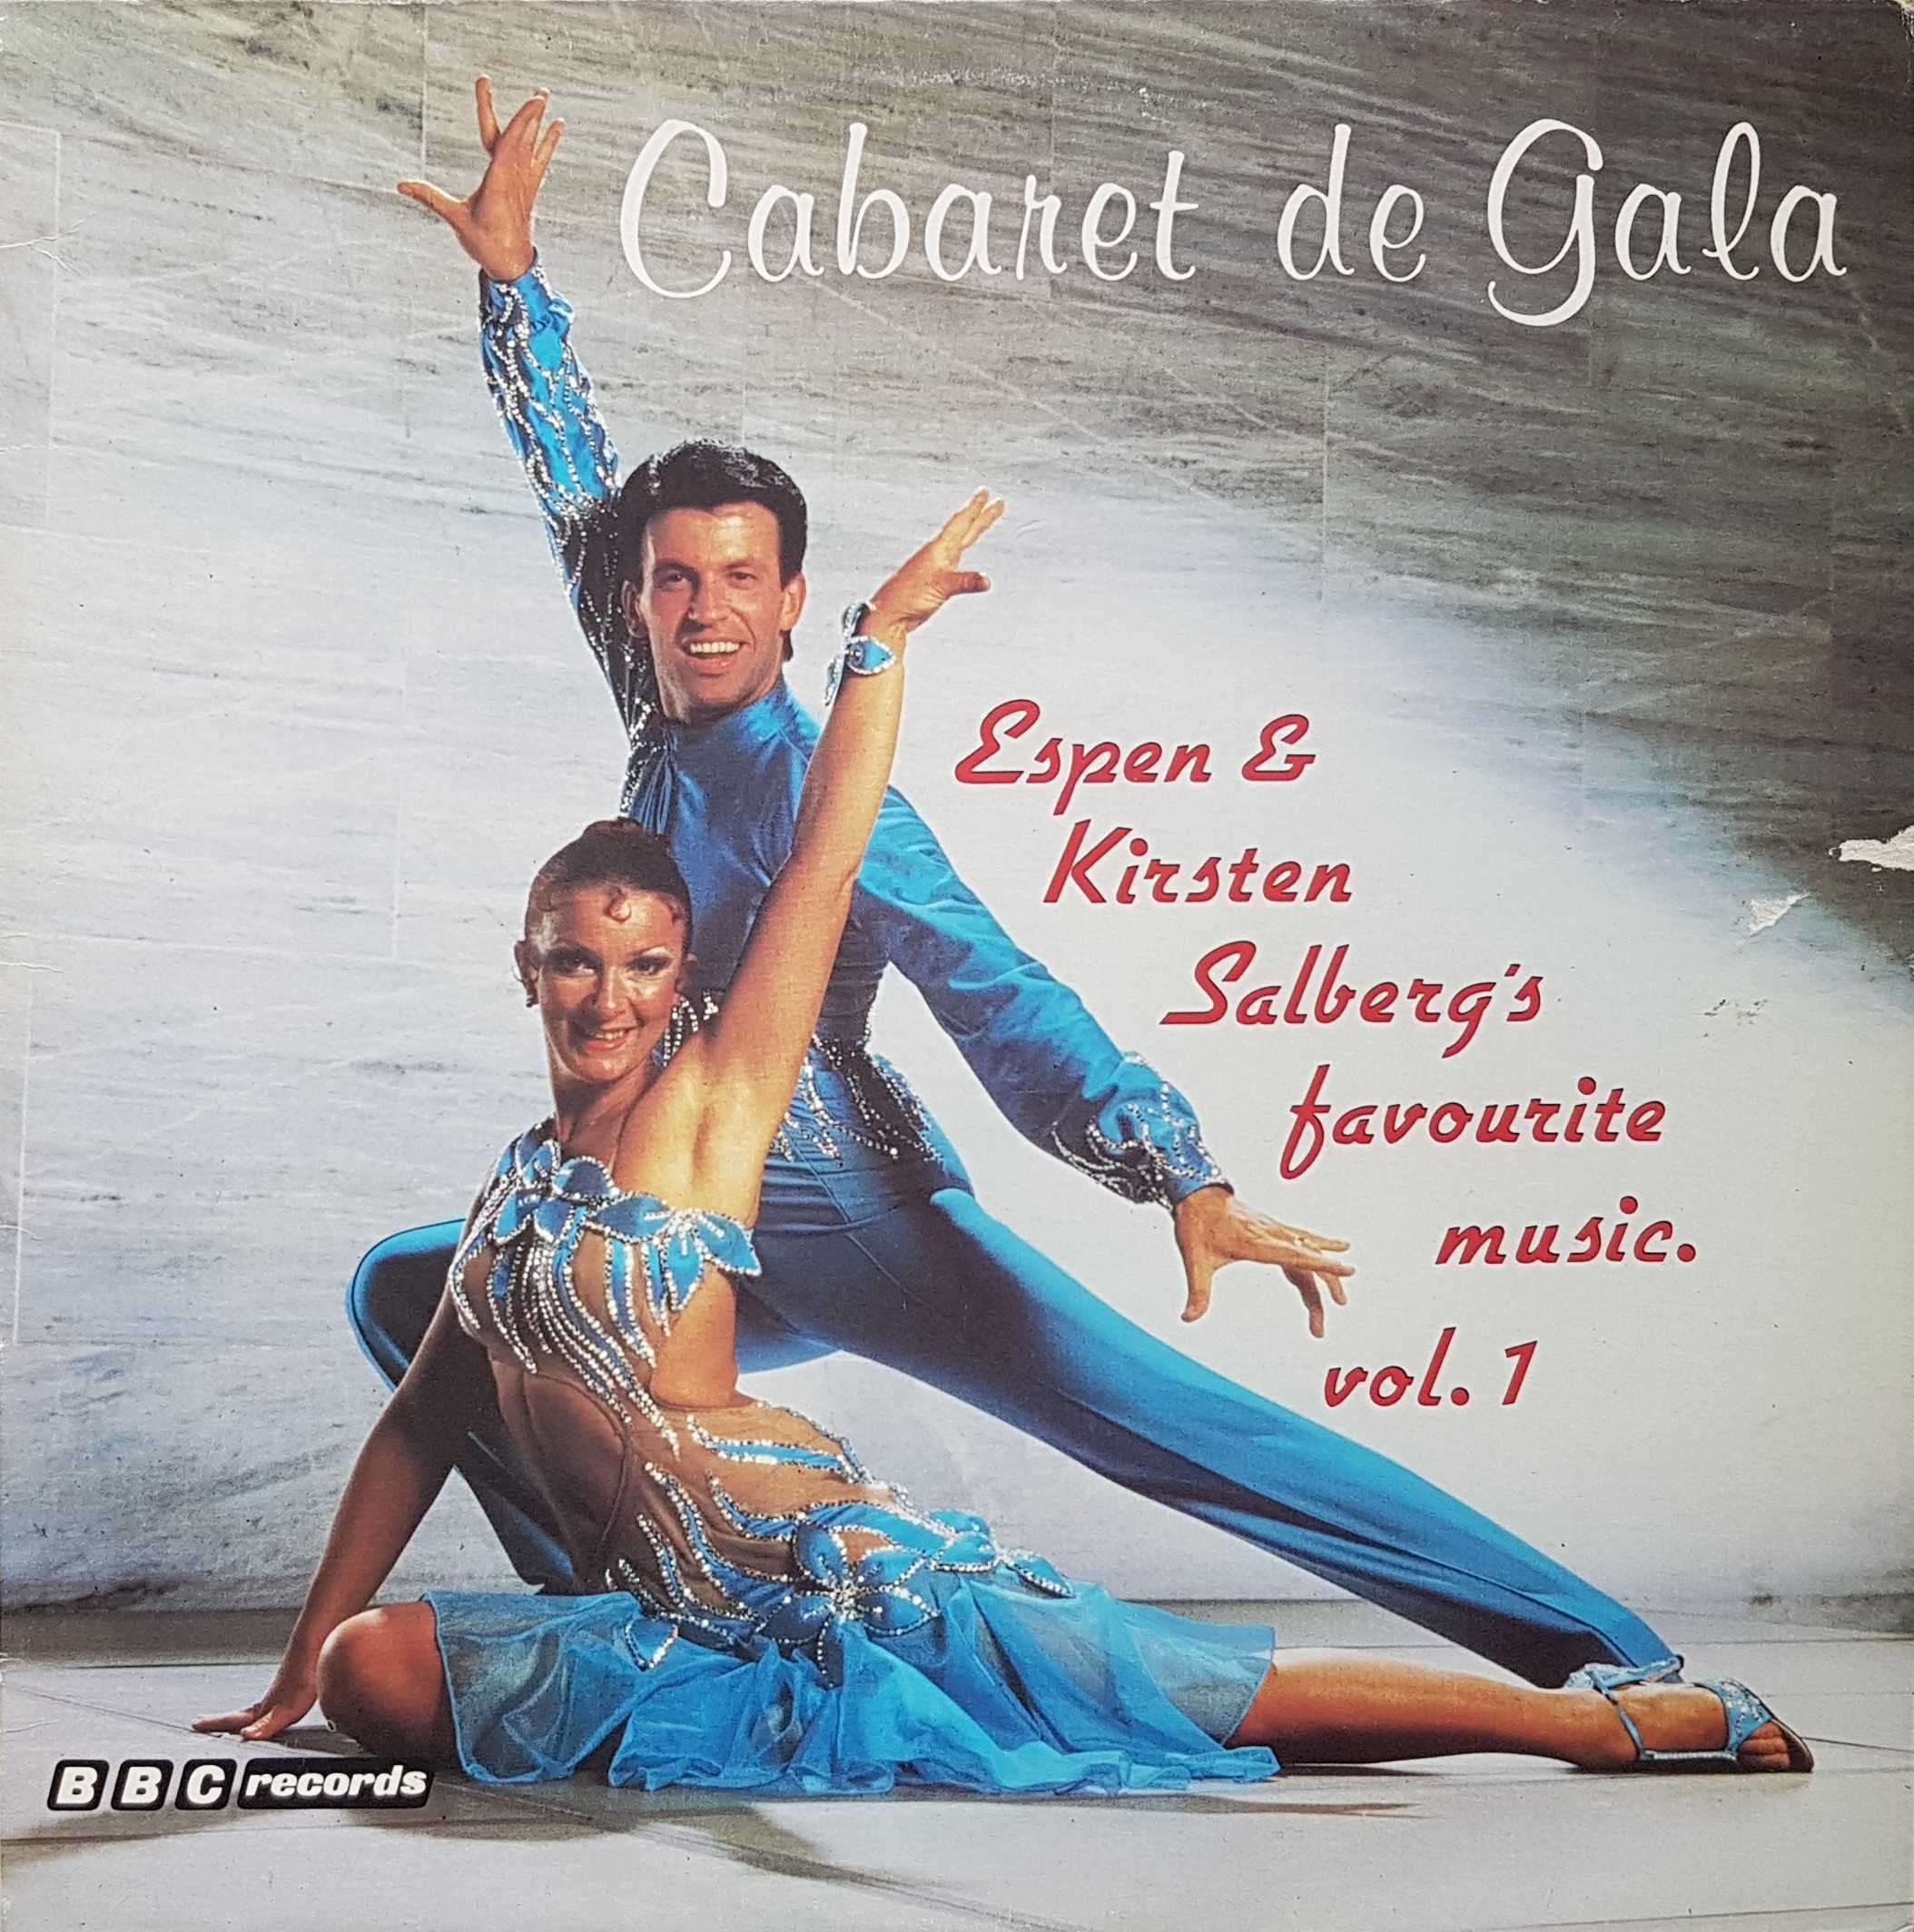 Picture of BBCL 101 Cabaret de gala by artist Various from the BBC albums - Records and Tapes library